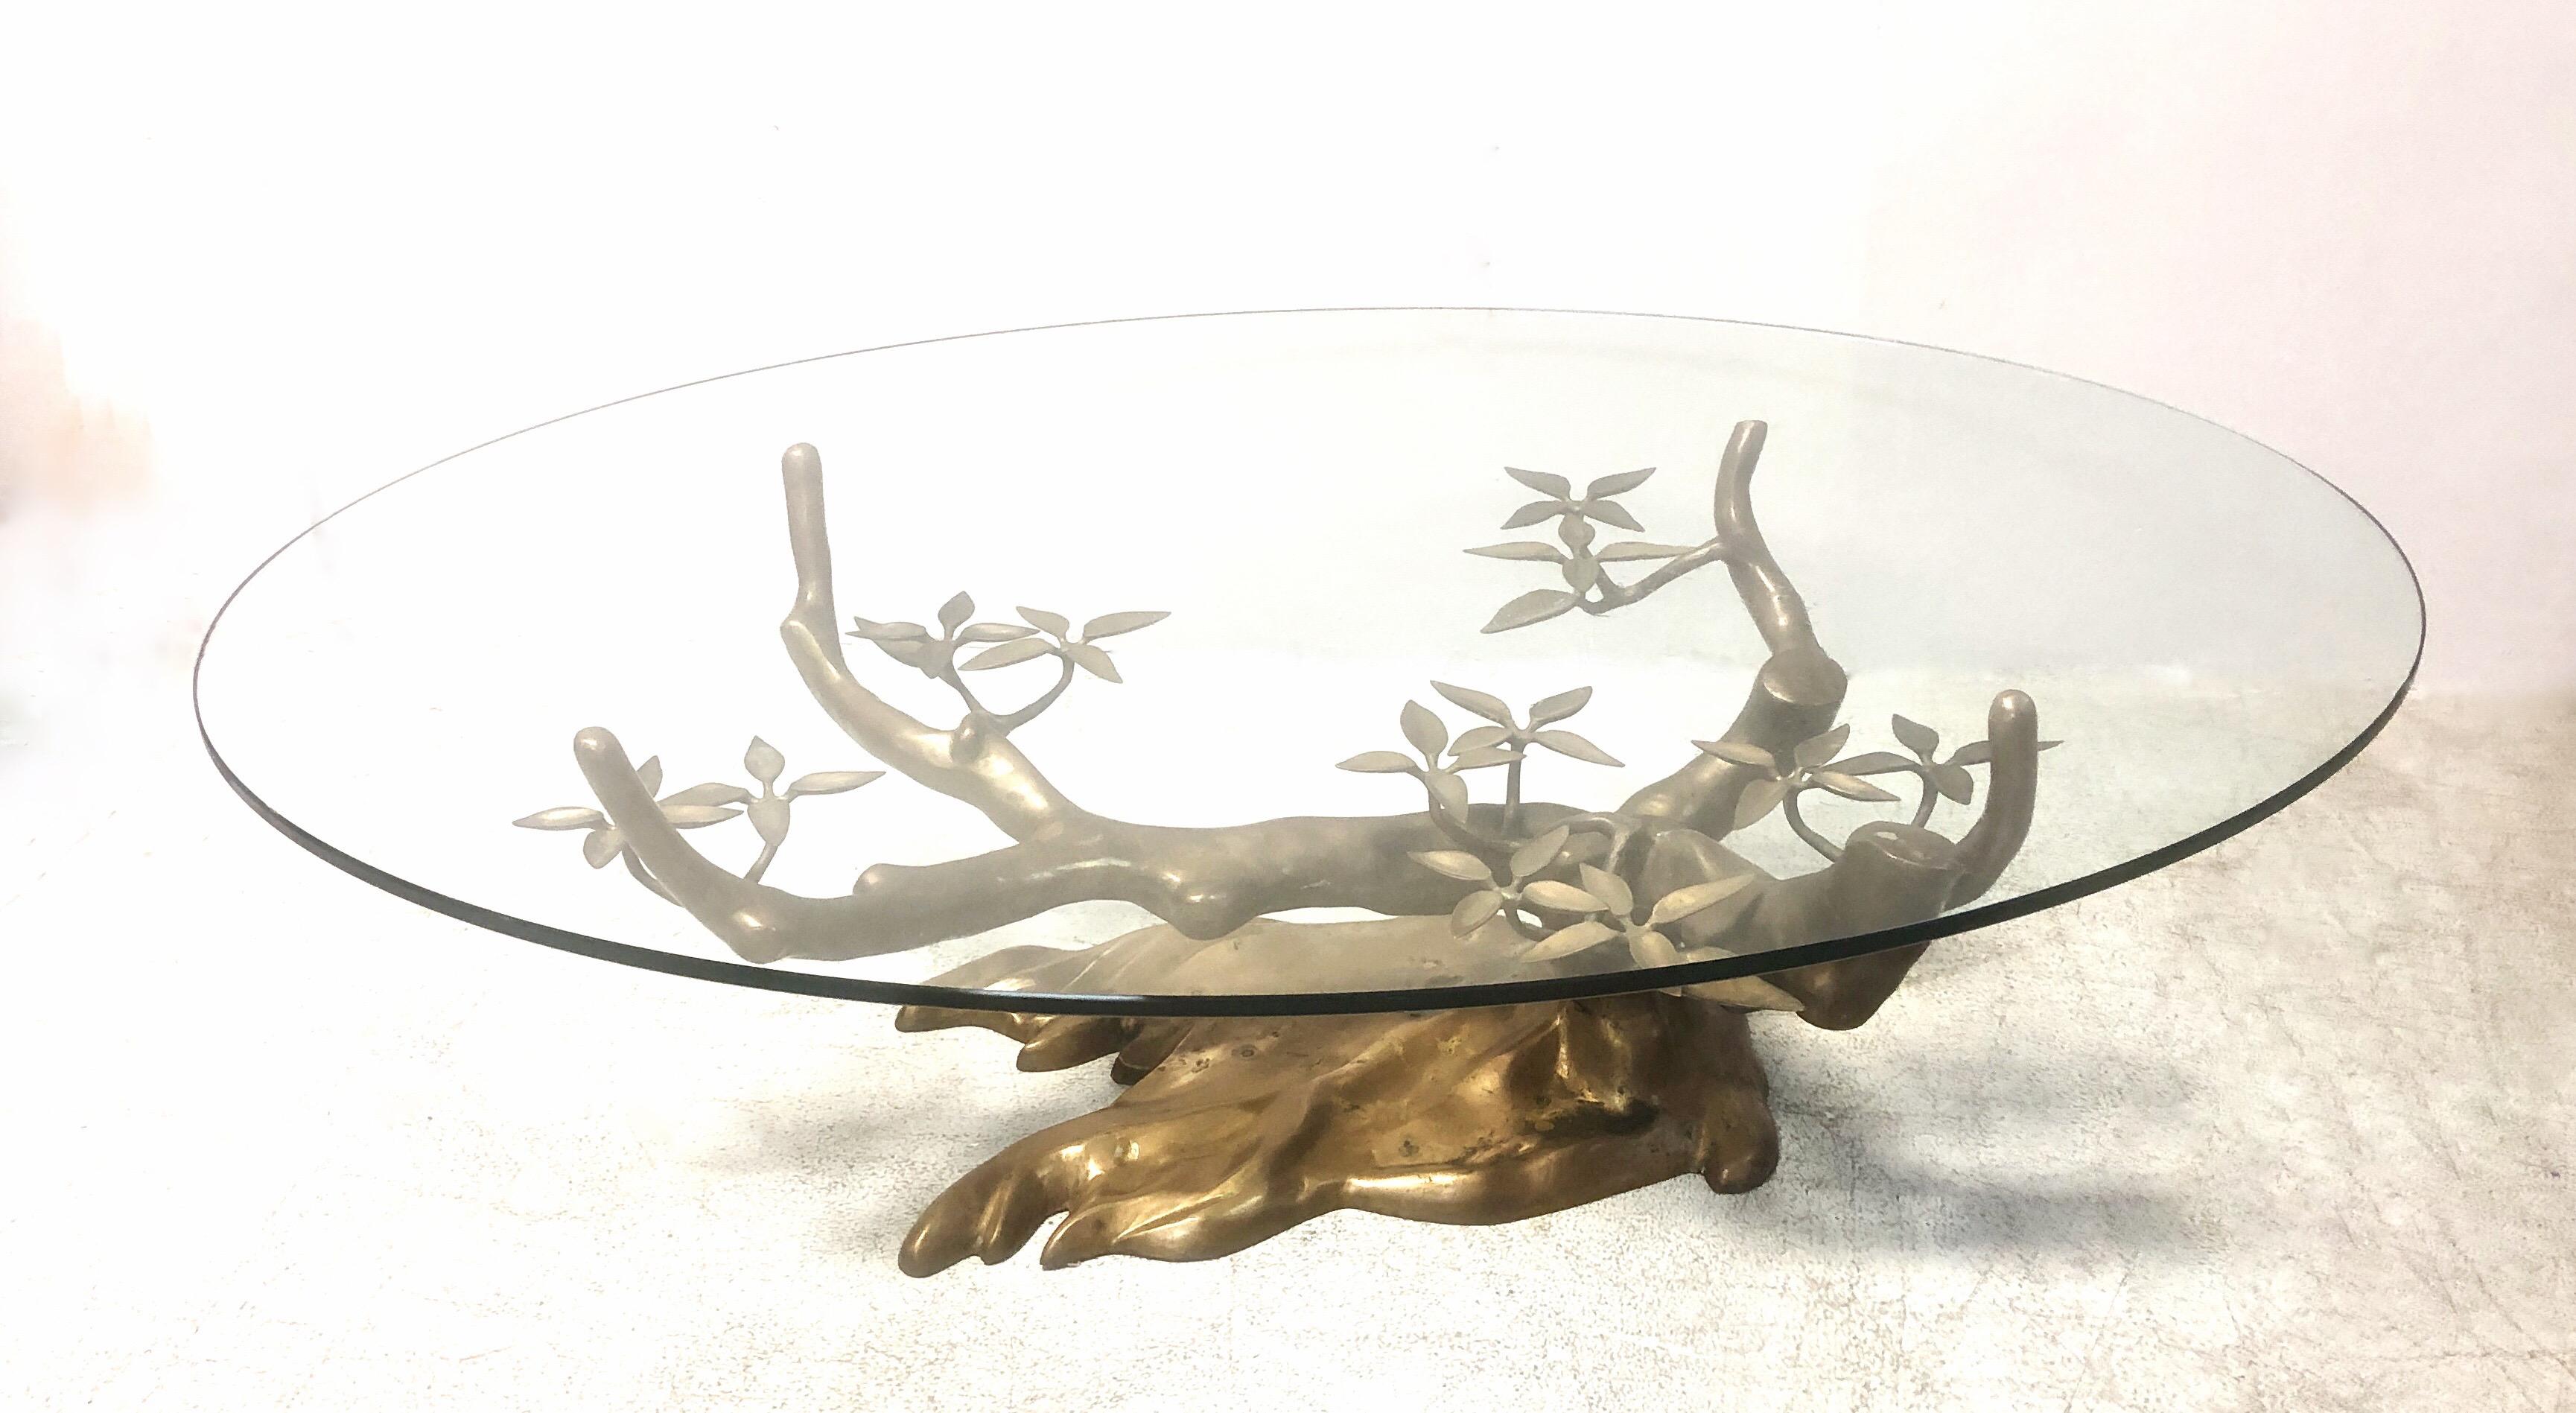 A brass coffee table in the shape of a stylized bonsai tree. Graceful with a simple elegance elegant design. Shown with the original oval glass top. Sculptural brass base is 38